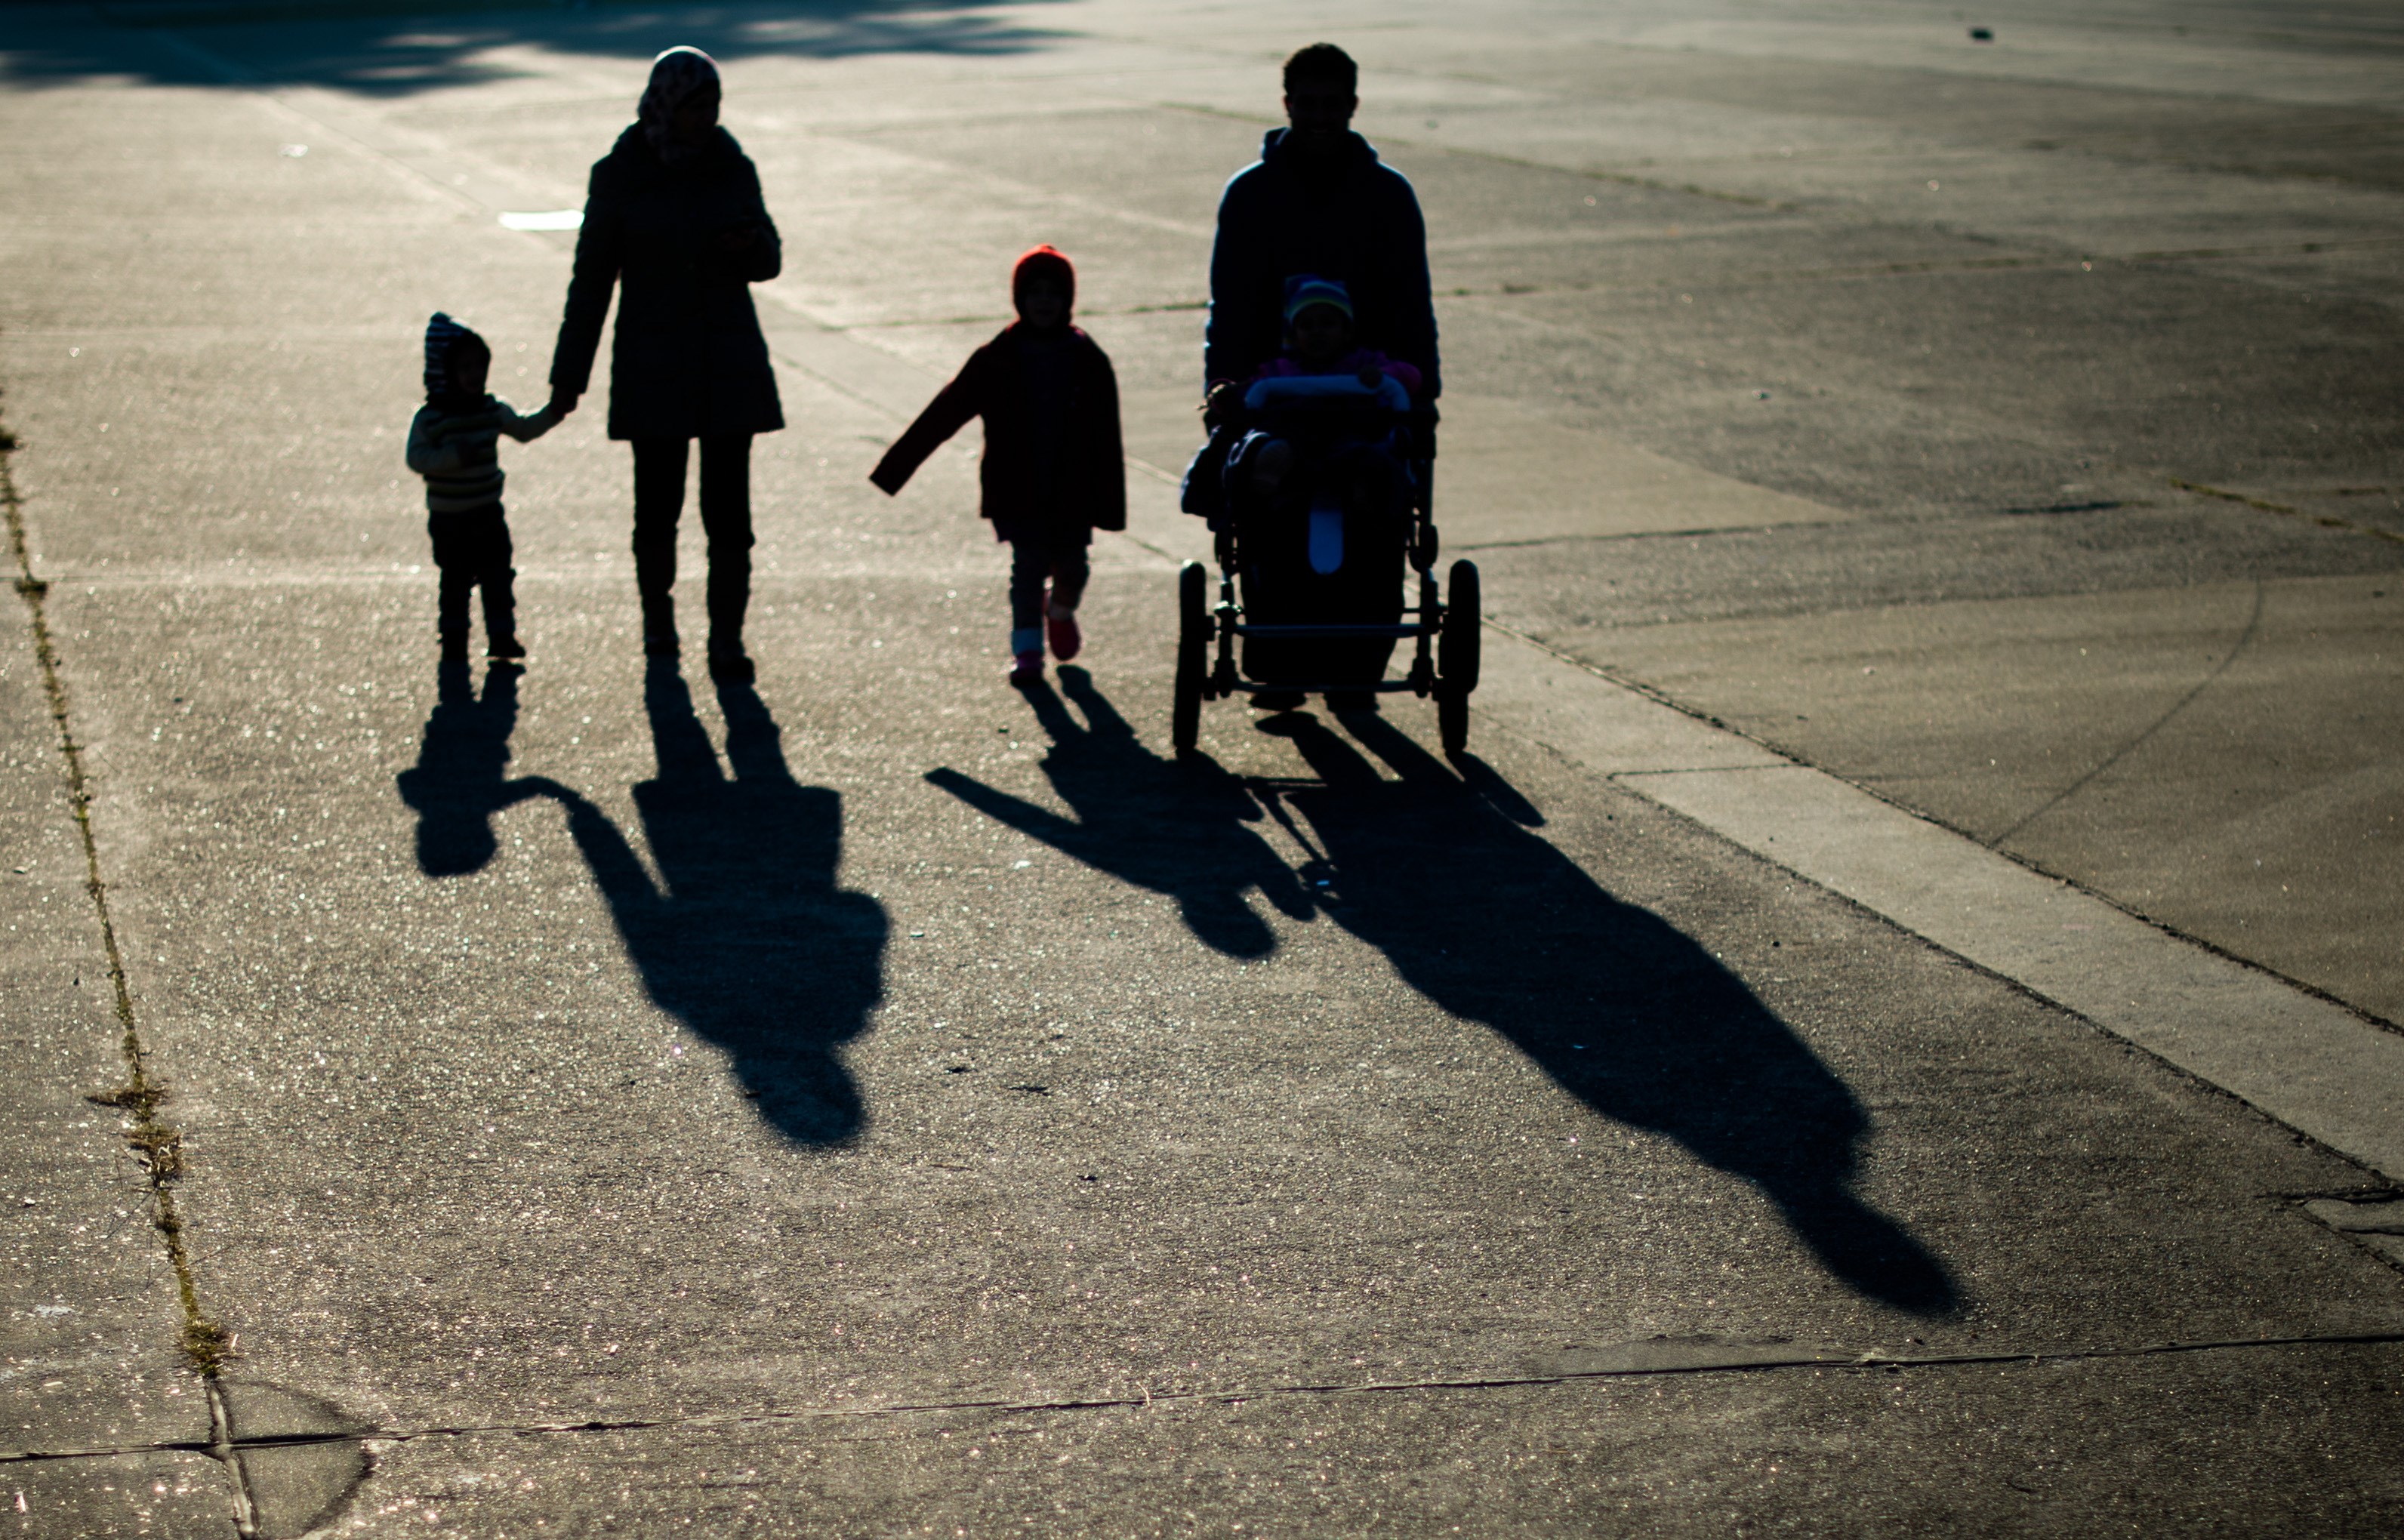 A refugee family from Syria cast long shadows as they walk  in Ehra-Lessien, in central Germany, on Nov. 3, 2015 (Julian Stratenschulte—AFP/Getty Images)